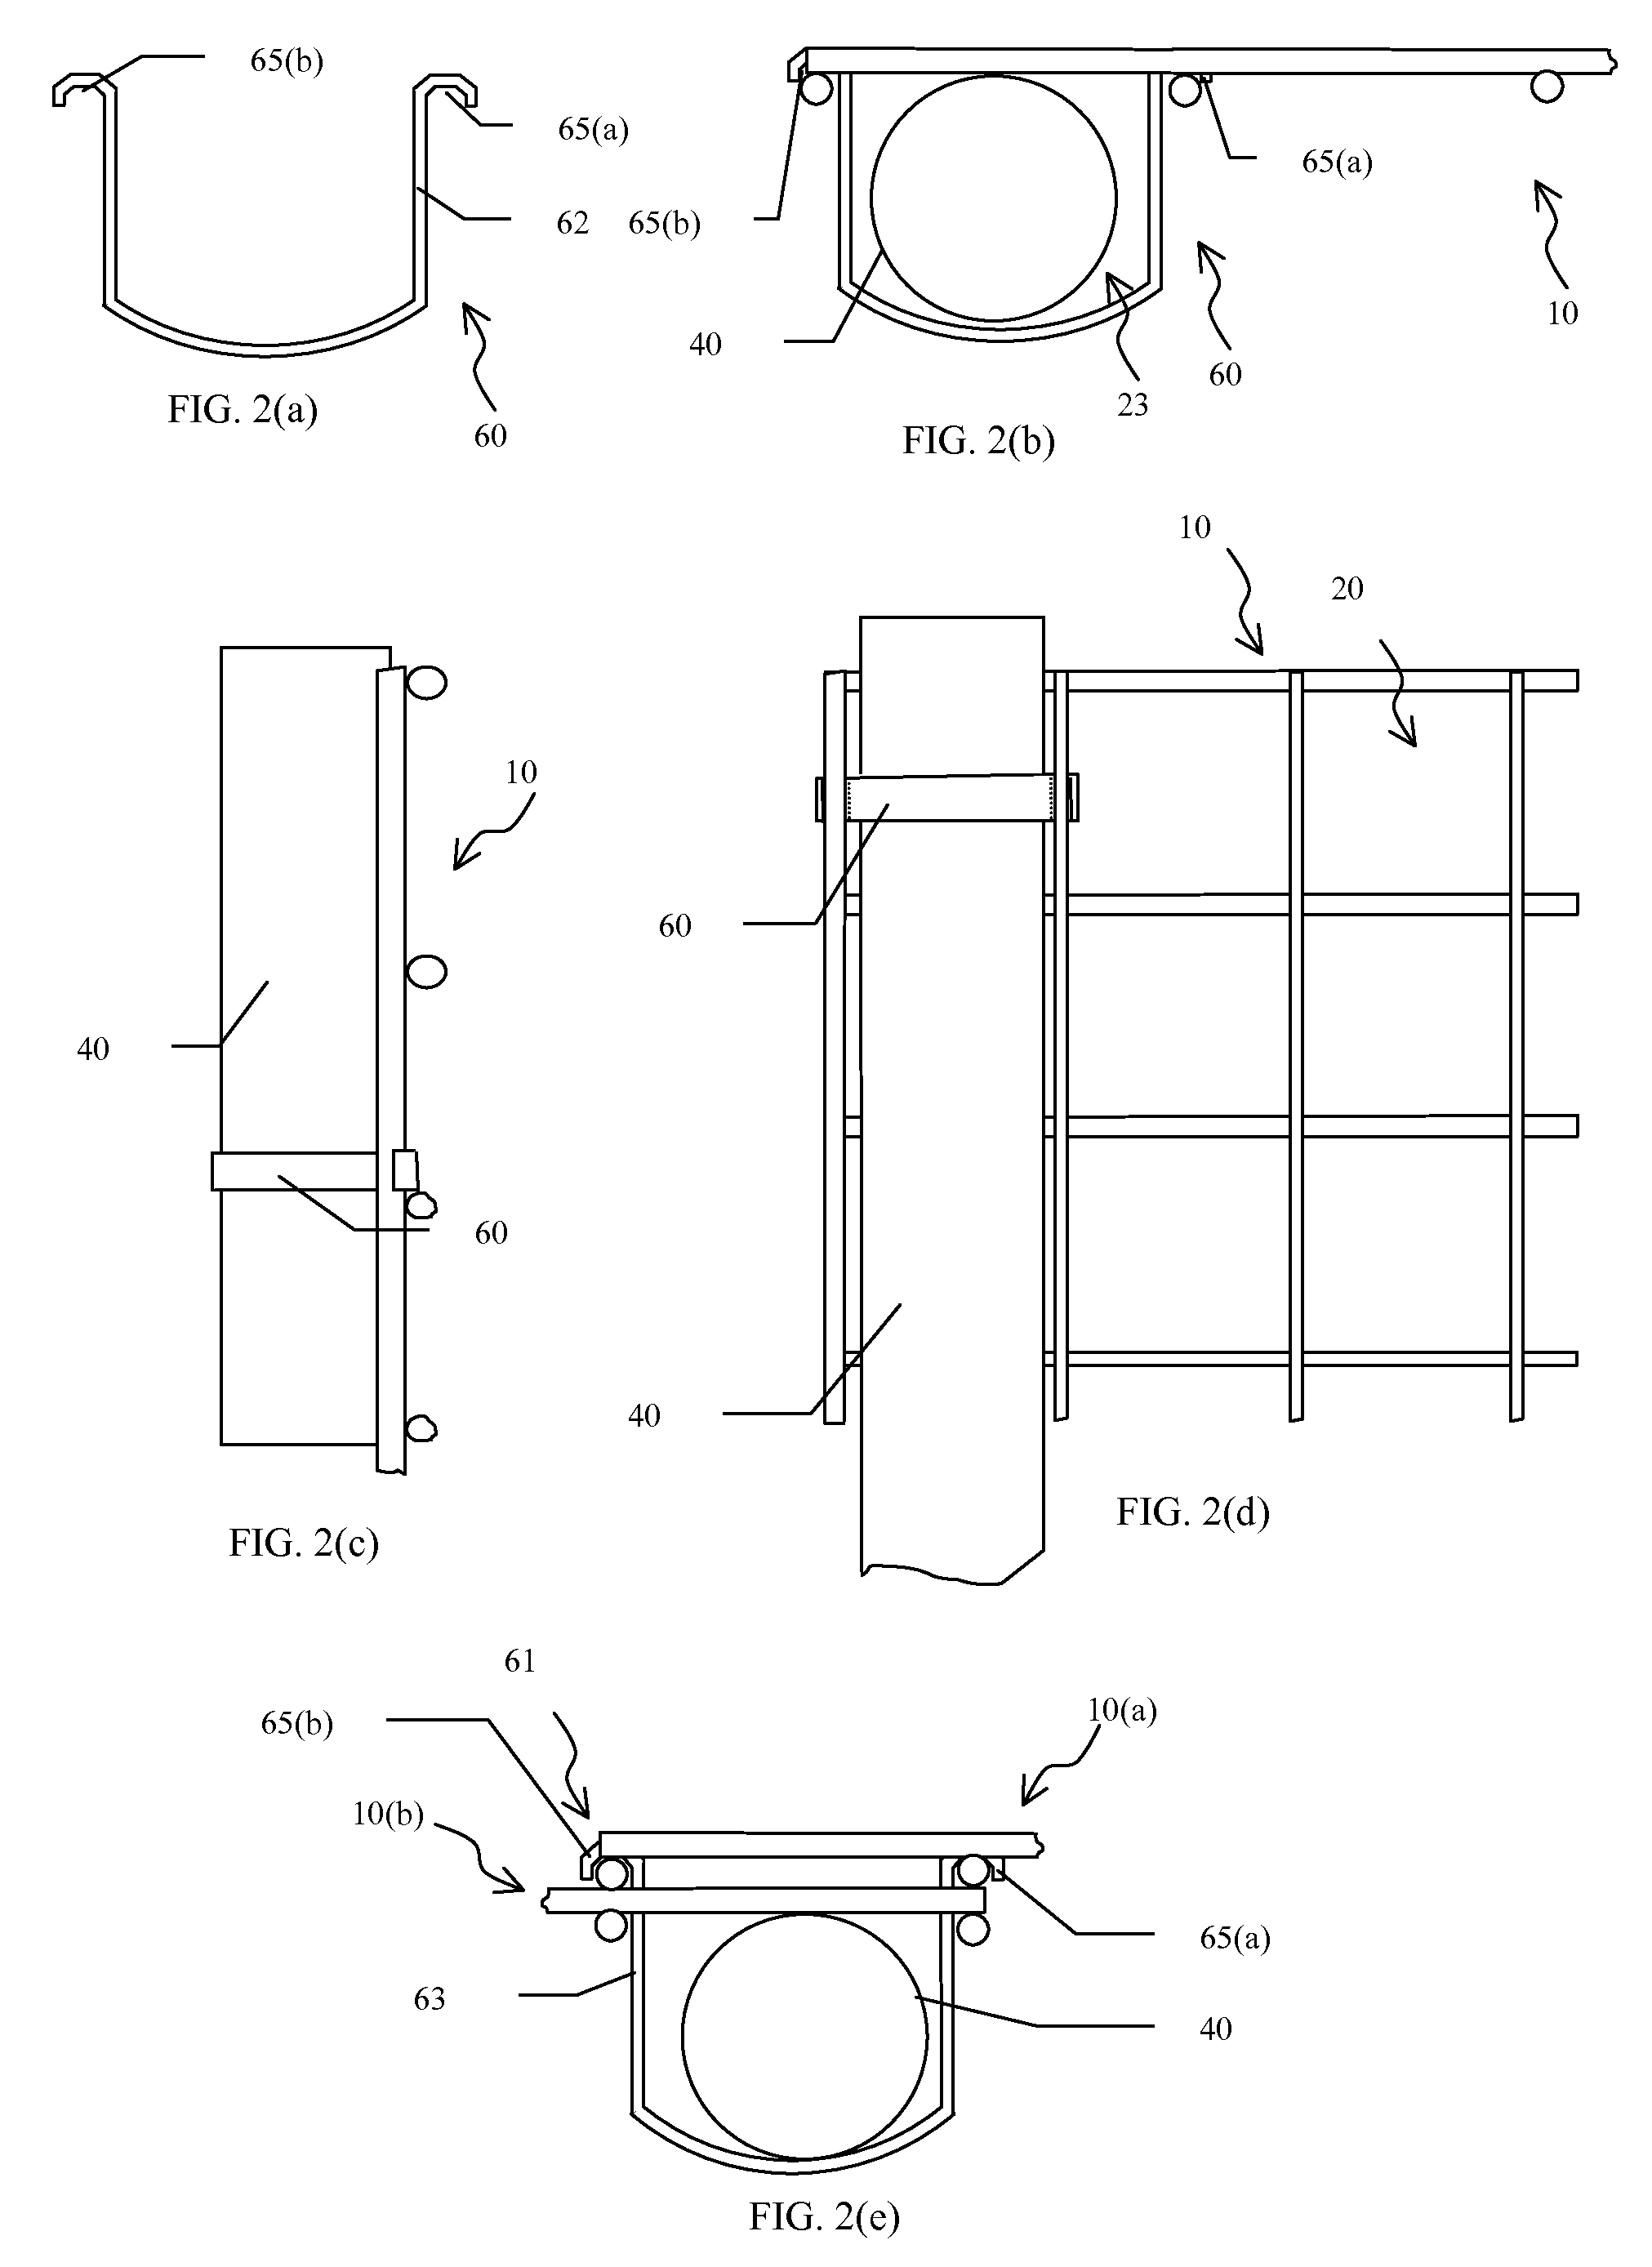 Fence assembly and related methods